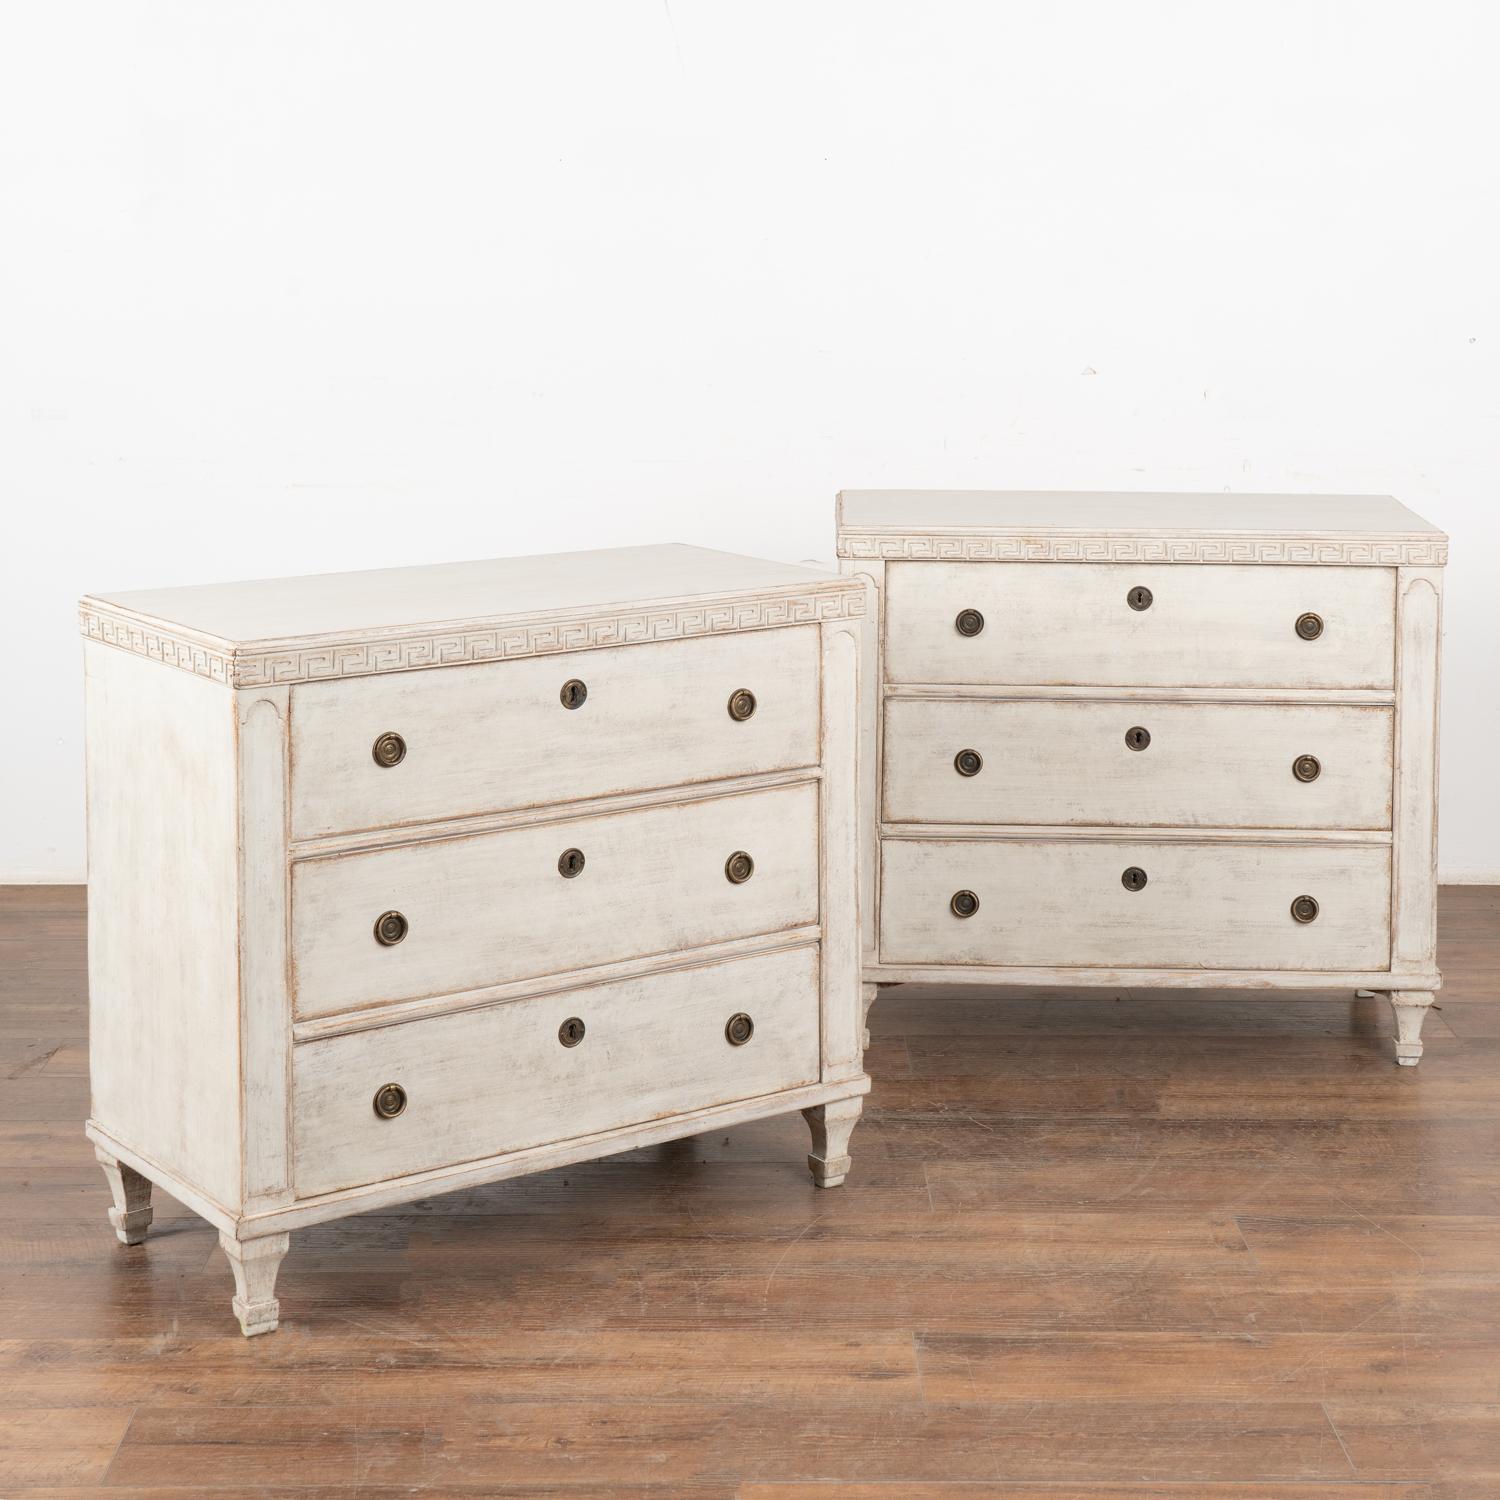 A pair of Gustavian pine chest of drawers with Greek key motif carved in upper molding resting on fluted feet.
The newer, professionally applied antique white custom painted finish is perfectly distressed to fit the age and grace of this lovely pair